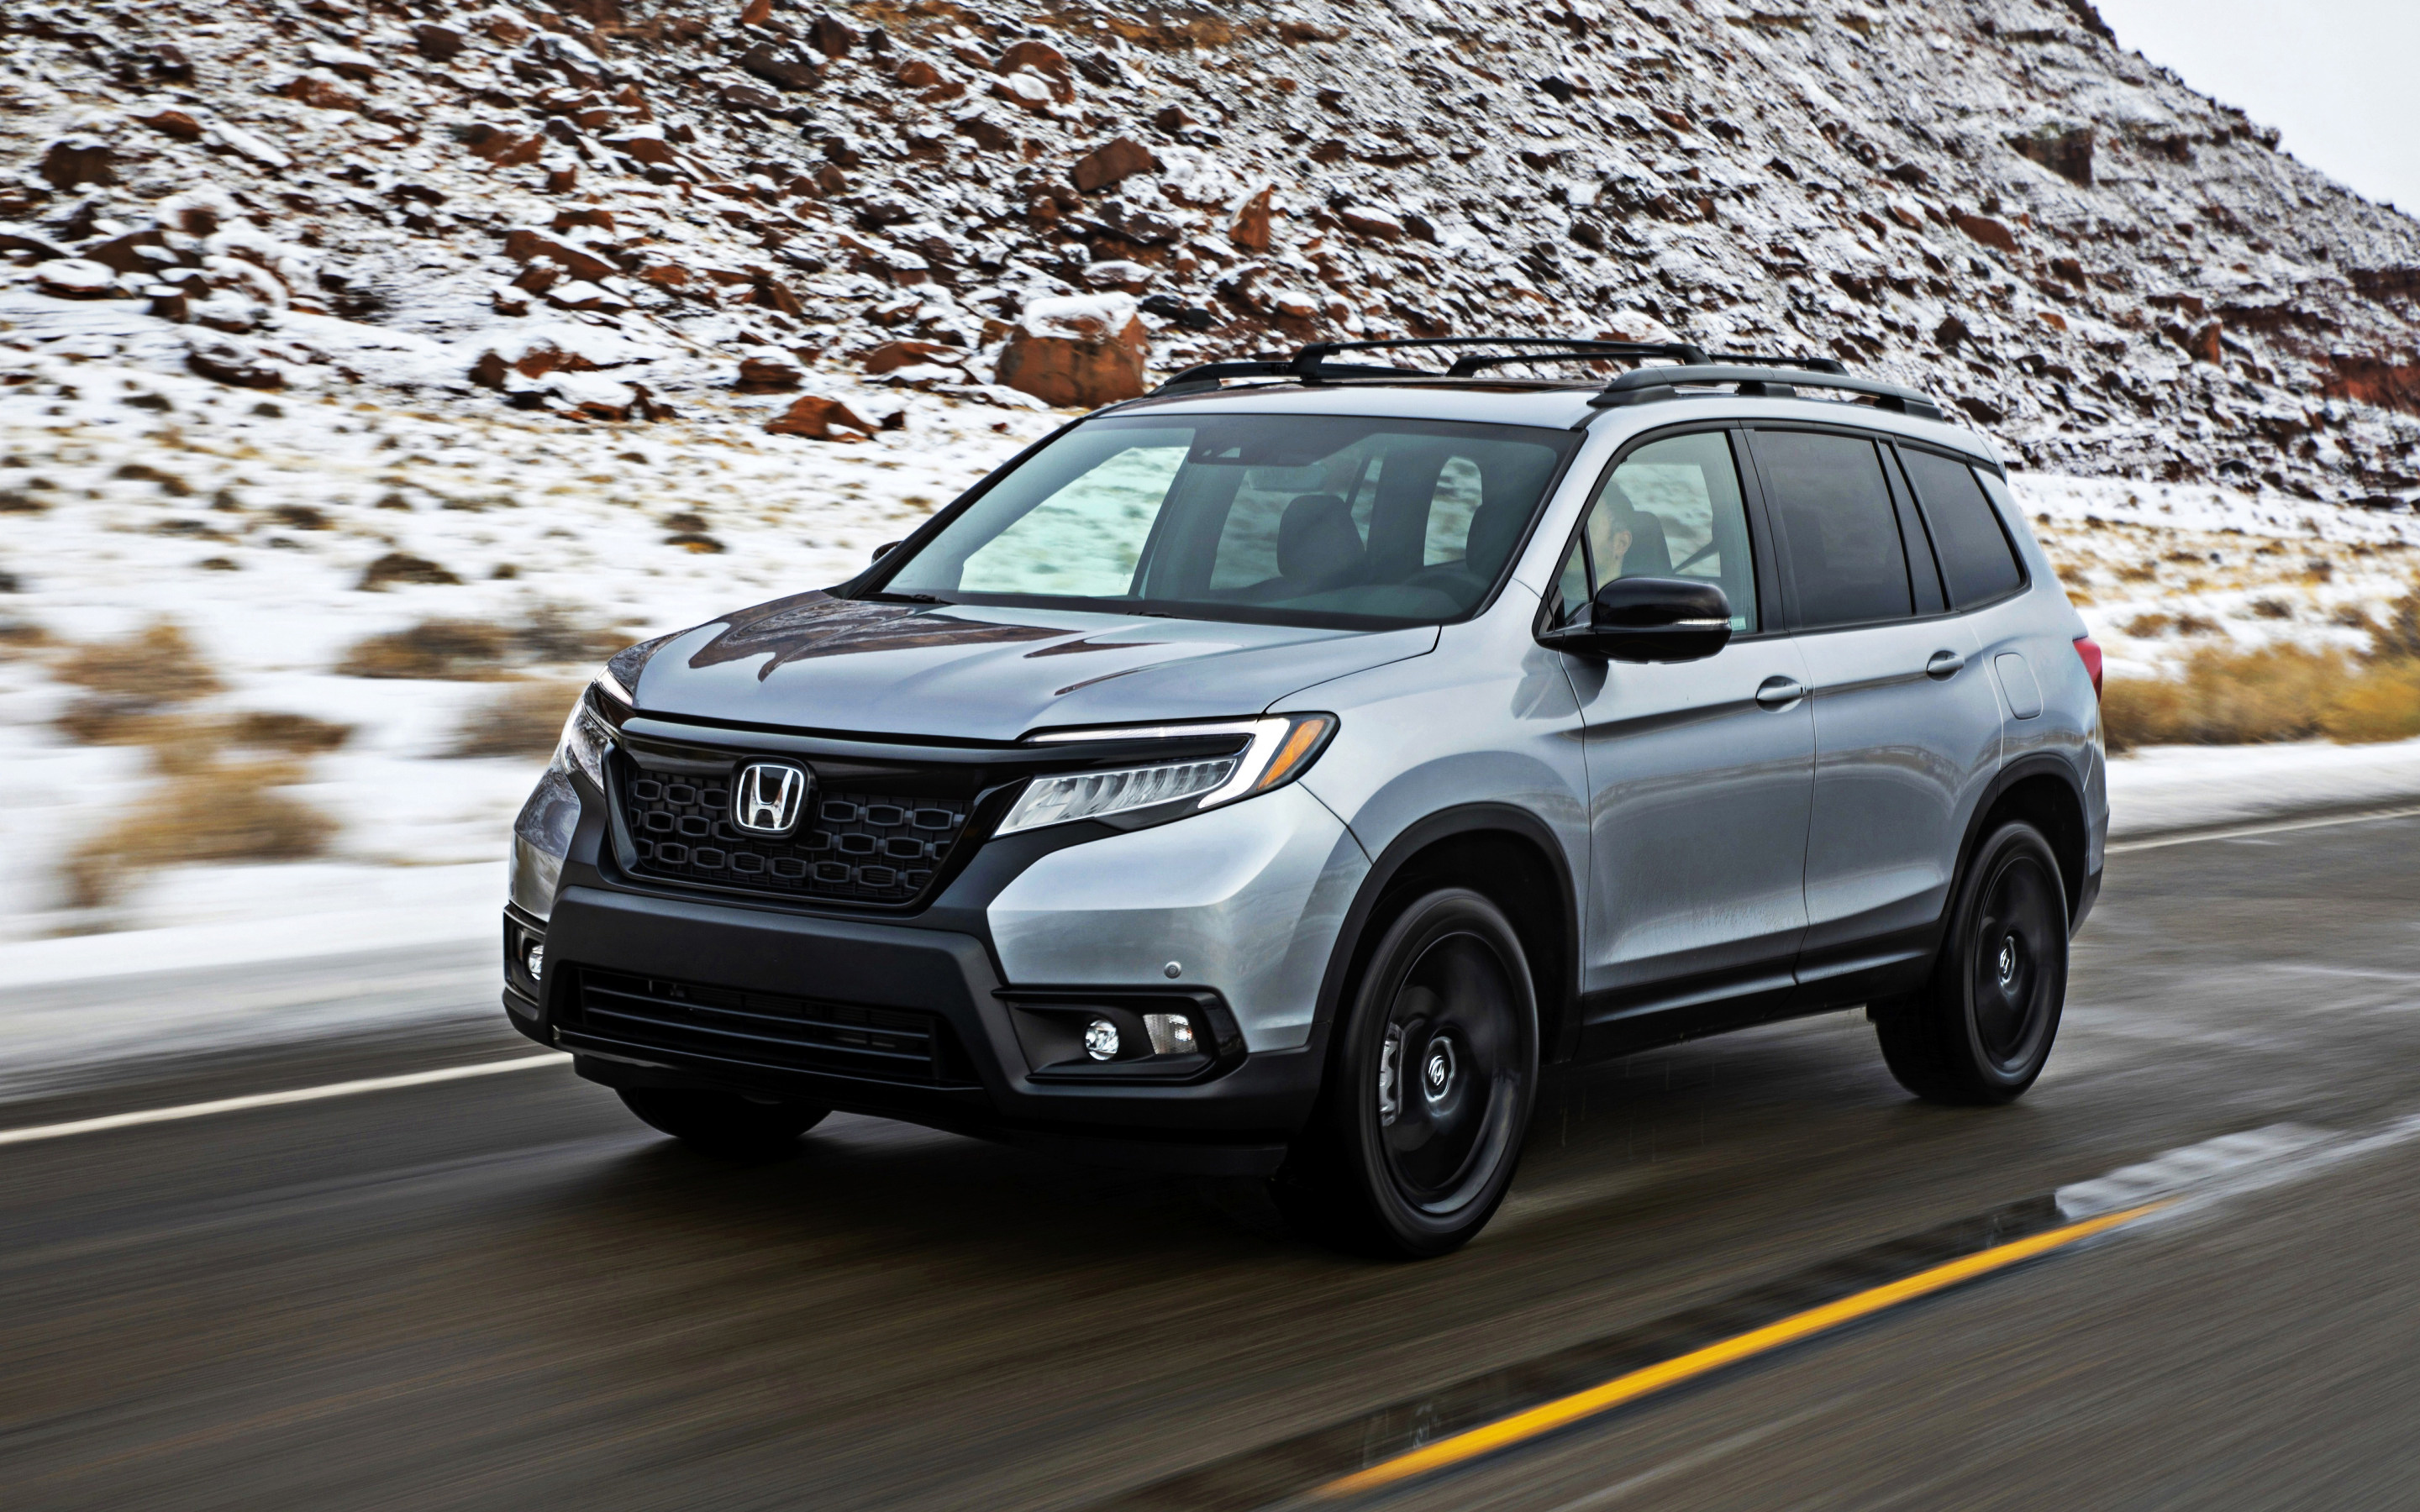 Honda Passport, Gray SUV wallpapers, Japanese car excellence, High-quality images, 2880x1800 HD Desktop